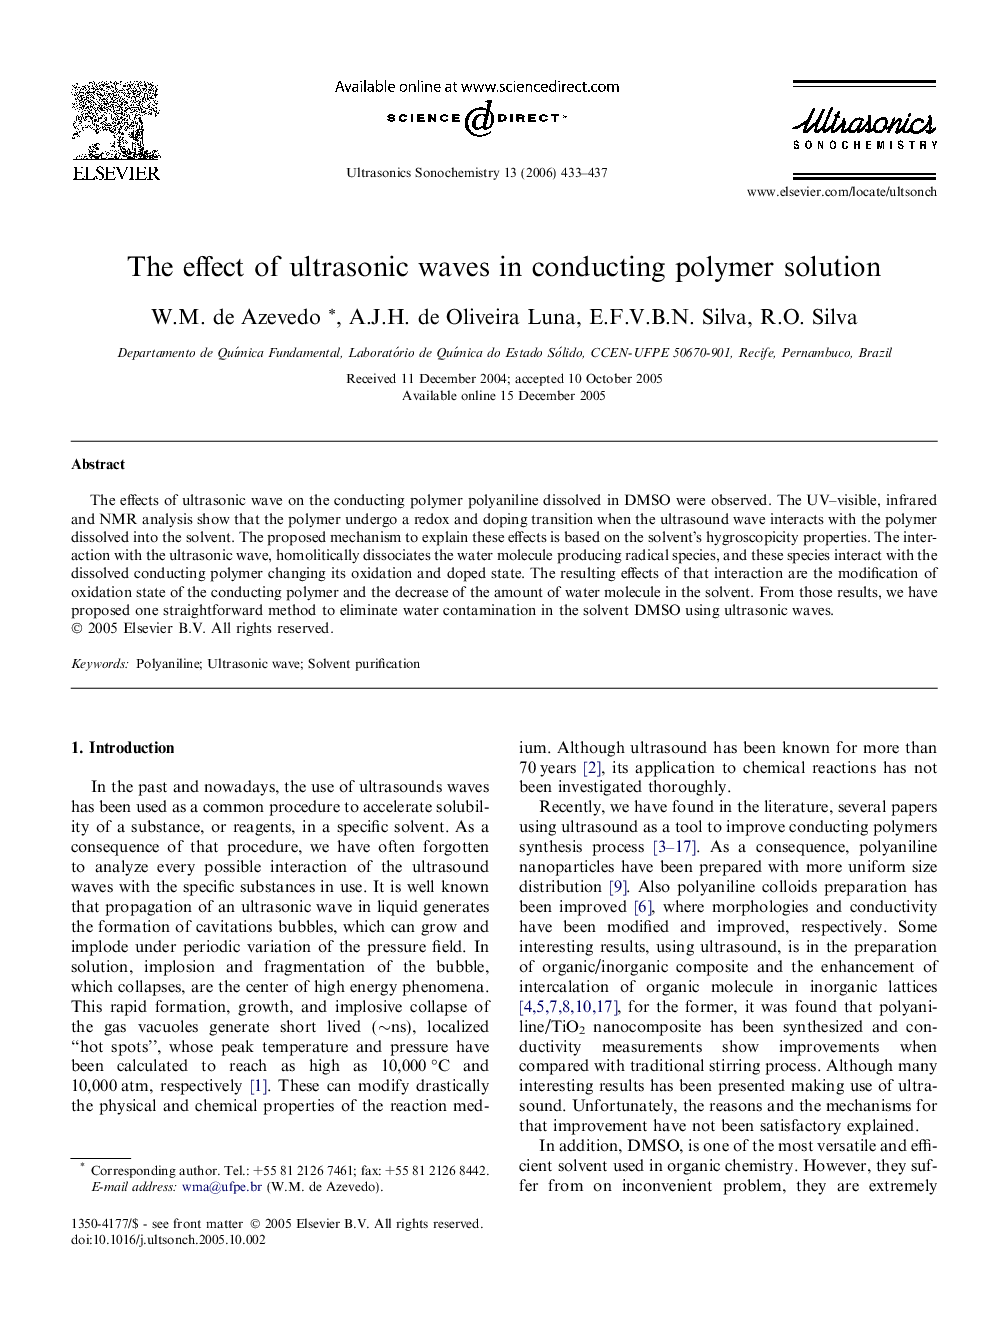 The effect of ultrasonic waves in conducting polymer solution